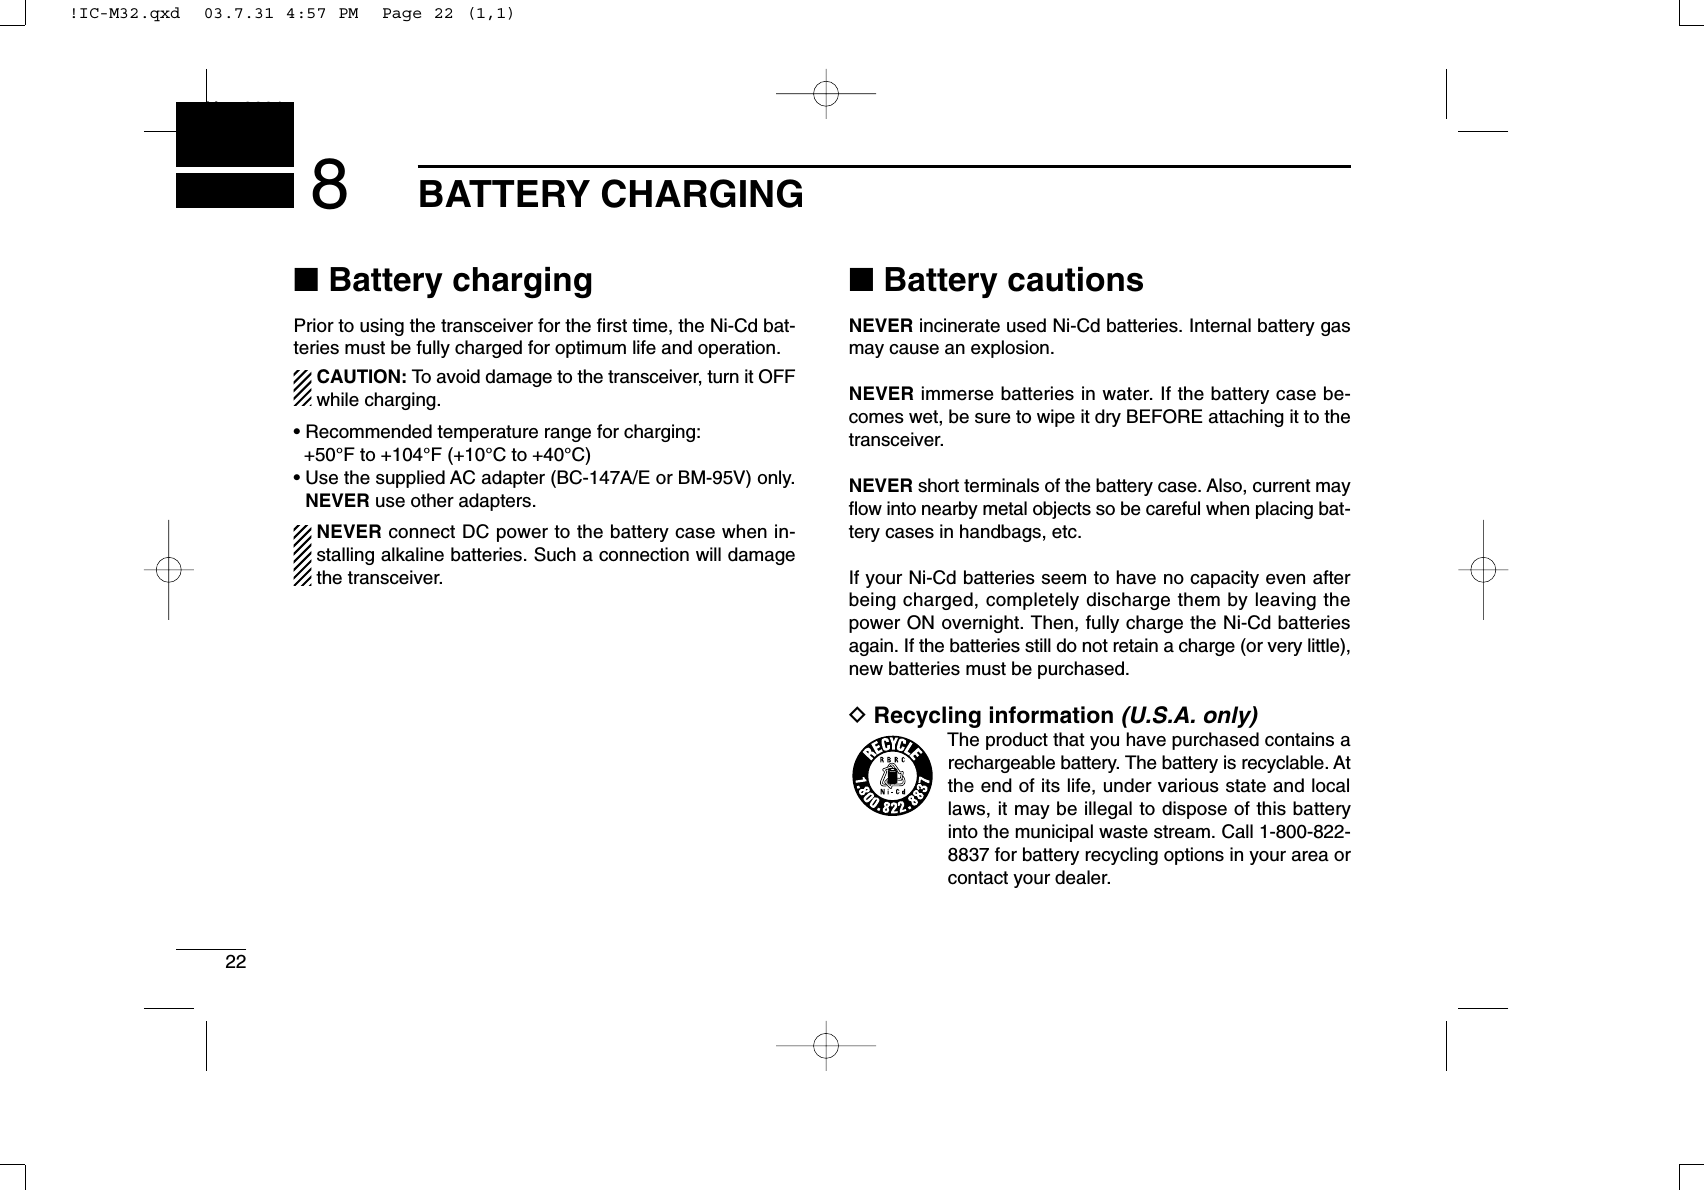 22BATTERY CHARGINGNew20018■Battery chargingPrior to using the transceiver for the ﬁrst time, the Ni-Cd bat-teries must be fully charged for optimum life and operation.CAUTION: To avoid damage to the transceiver, turn it OFFwhile charging.• Recommended temperature range for charging: +50°F to +104°F (+10°C to +40°C)• Use the supplied AC adapter (BC-147A/E or BM-95V) only.NEVER use other adapters.NEVER connect DC power to the battery case when in-stalling alkaline batteries. Such a connection will damagethe transceiver.■Battery cautionsNEVER incinerate used Ni-Cd batteries. Internal battery gasmay cause an explosion.NEVER immerse batteries in water. If the battery case be-comes wet, be sure to wipe it dry BEFORE attaching it to thetransceiver.NEVER short terminals of the battery case. Also, current mayﬂow into nearby metal objects so be careful when placing bat-tery cases in handbags, etc.If your Ni-Cd batteries seem to have no capacity even afterbeing charged, completely discharge them by leaving thepower ON overnight. Then, fully charge the Ni-Cd batteriesagain. If the batteries still do not retain a charge (or very little),new batteries must be purchased.DRecycling information (U.S.A. only)The product that you have purchased contains arechargeable battery. The battery is recyclable. Atthe end of its life, under various state and locallaws, it may be illegal to dispose of this batteryinto the municipal waste stream. Call 1-800-822-8837 for battery recycling options in your area orcontact your dealer.!IC-M32.qxd  03.7.31 4:57 PM  Page 22 (1,1)